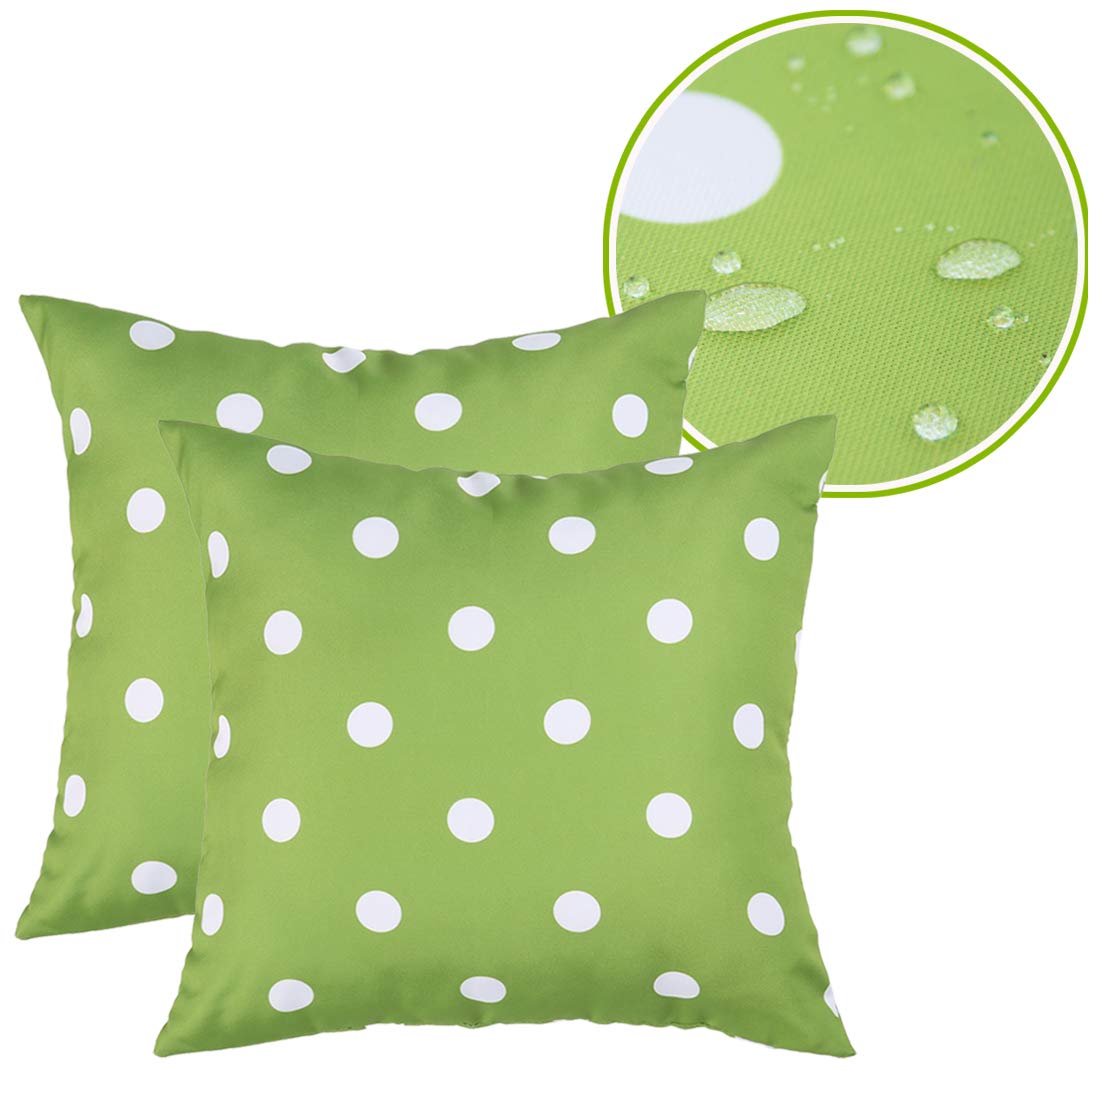 Eternal Beauty Set of 2 Outdoor Pillow Covers Waterproof Throw Pillow Covers for Christmas Outdoor Patio Furniture, Green Polka 